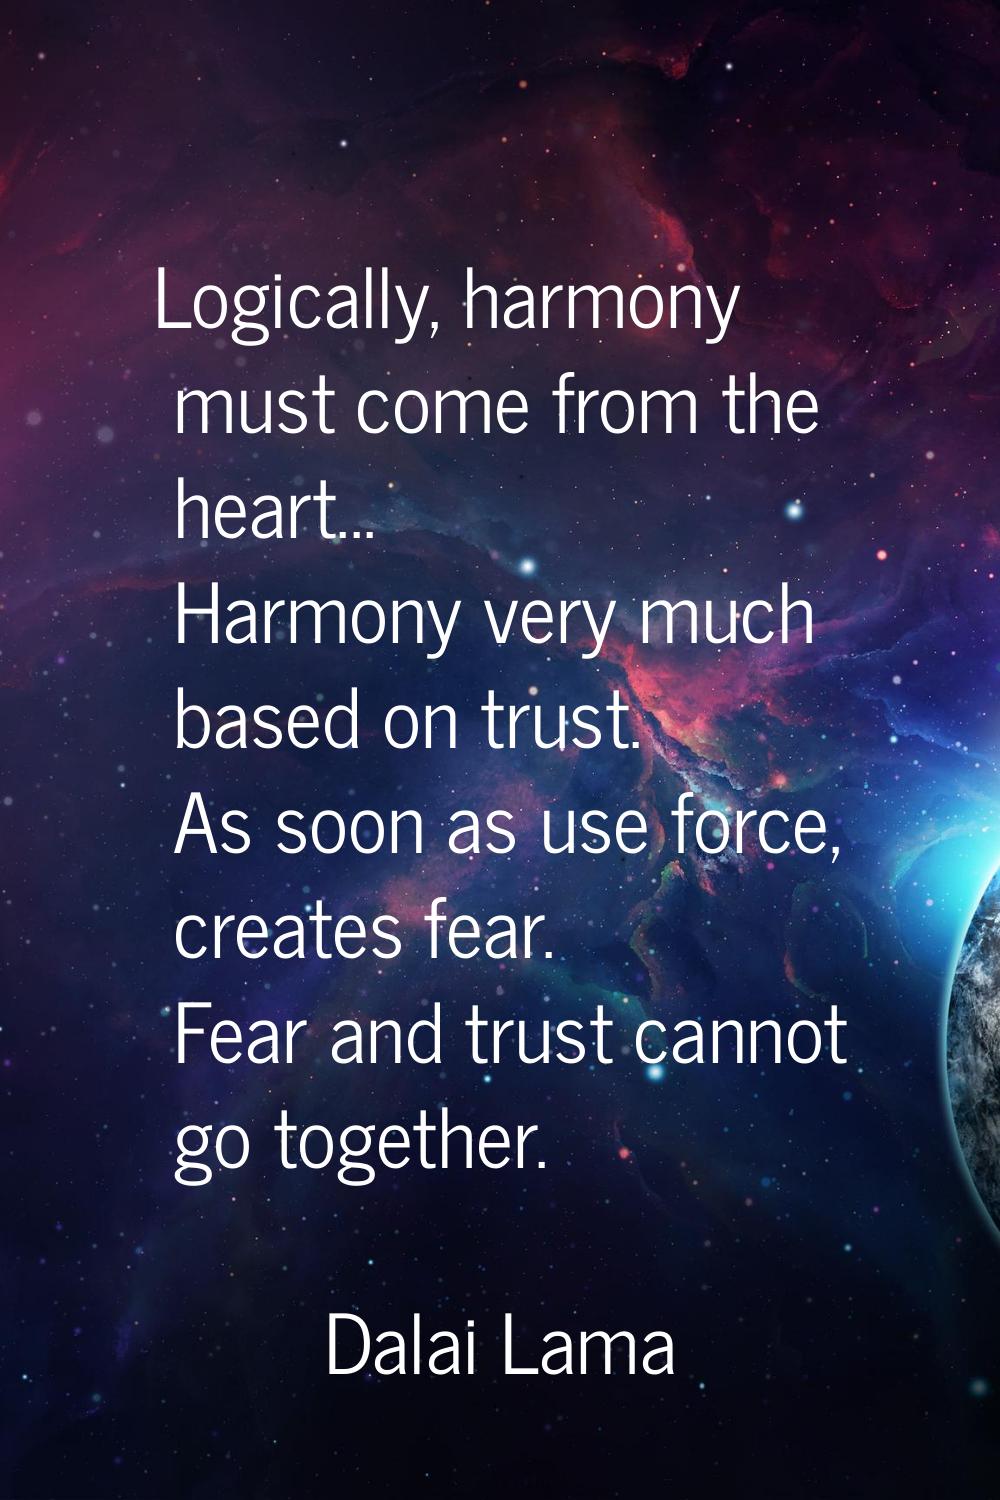 Logically, harmony must come from the heart... Harmony very much based on trust. As soon as use for